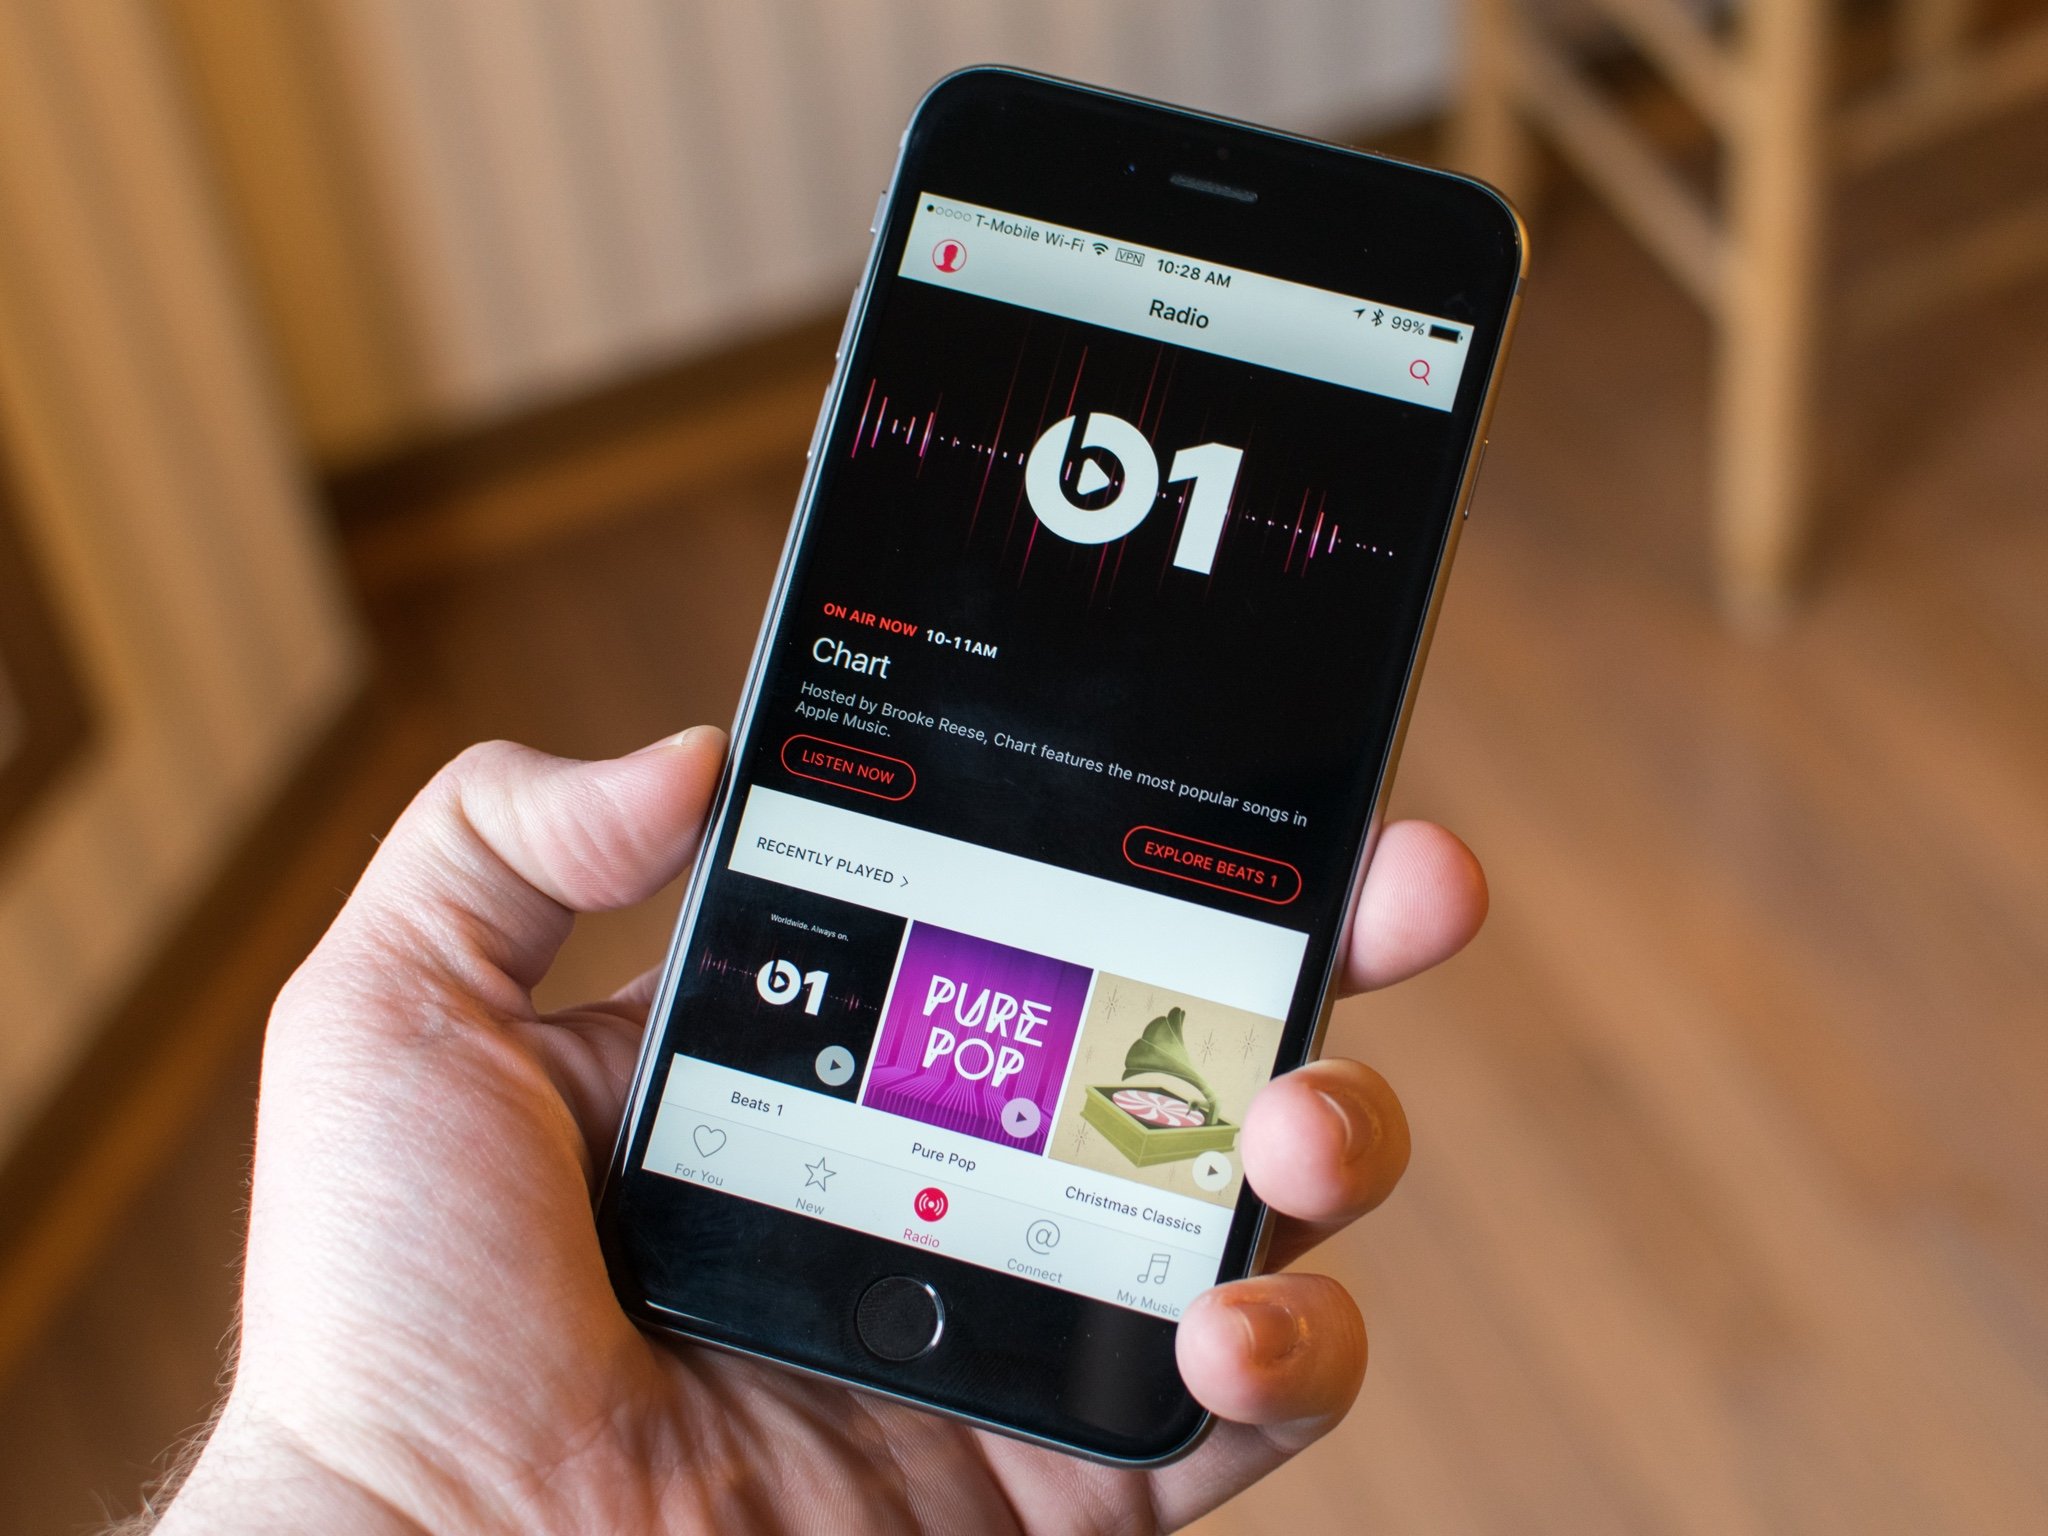 Canadians to host Beats 1 takeovers every Saturday in July